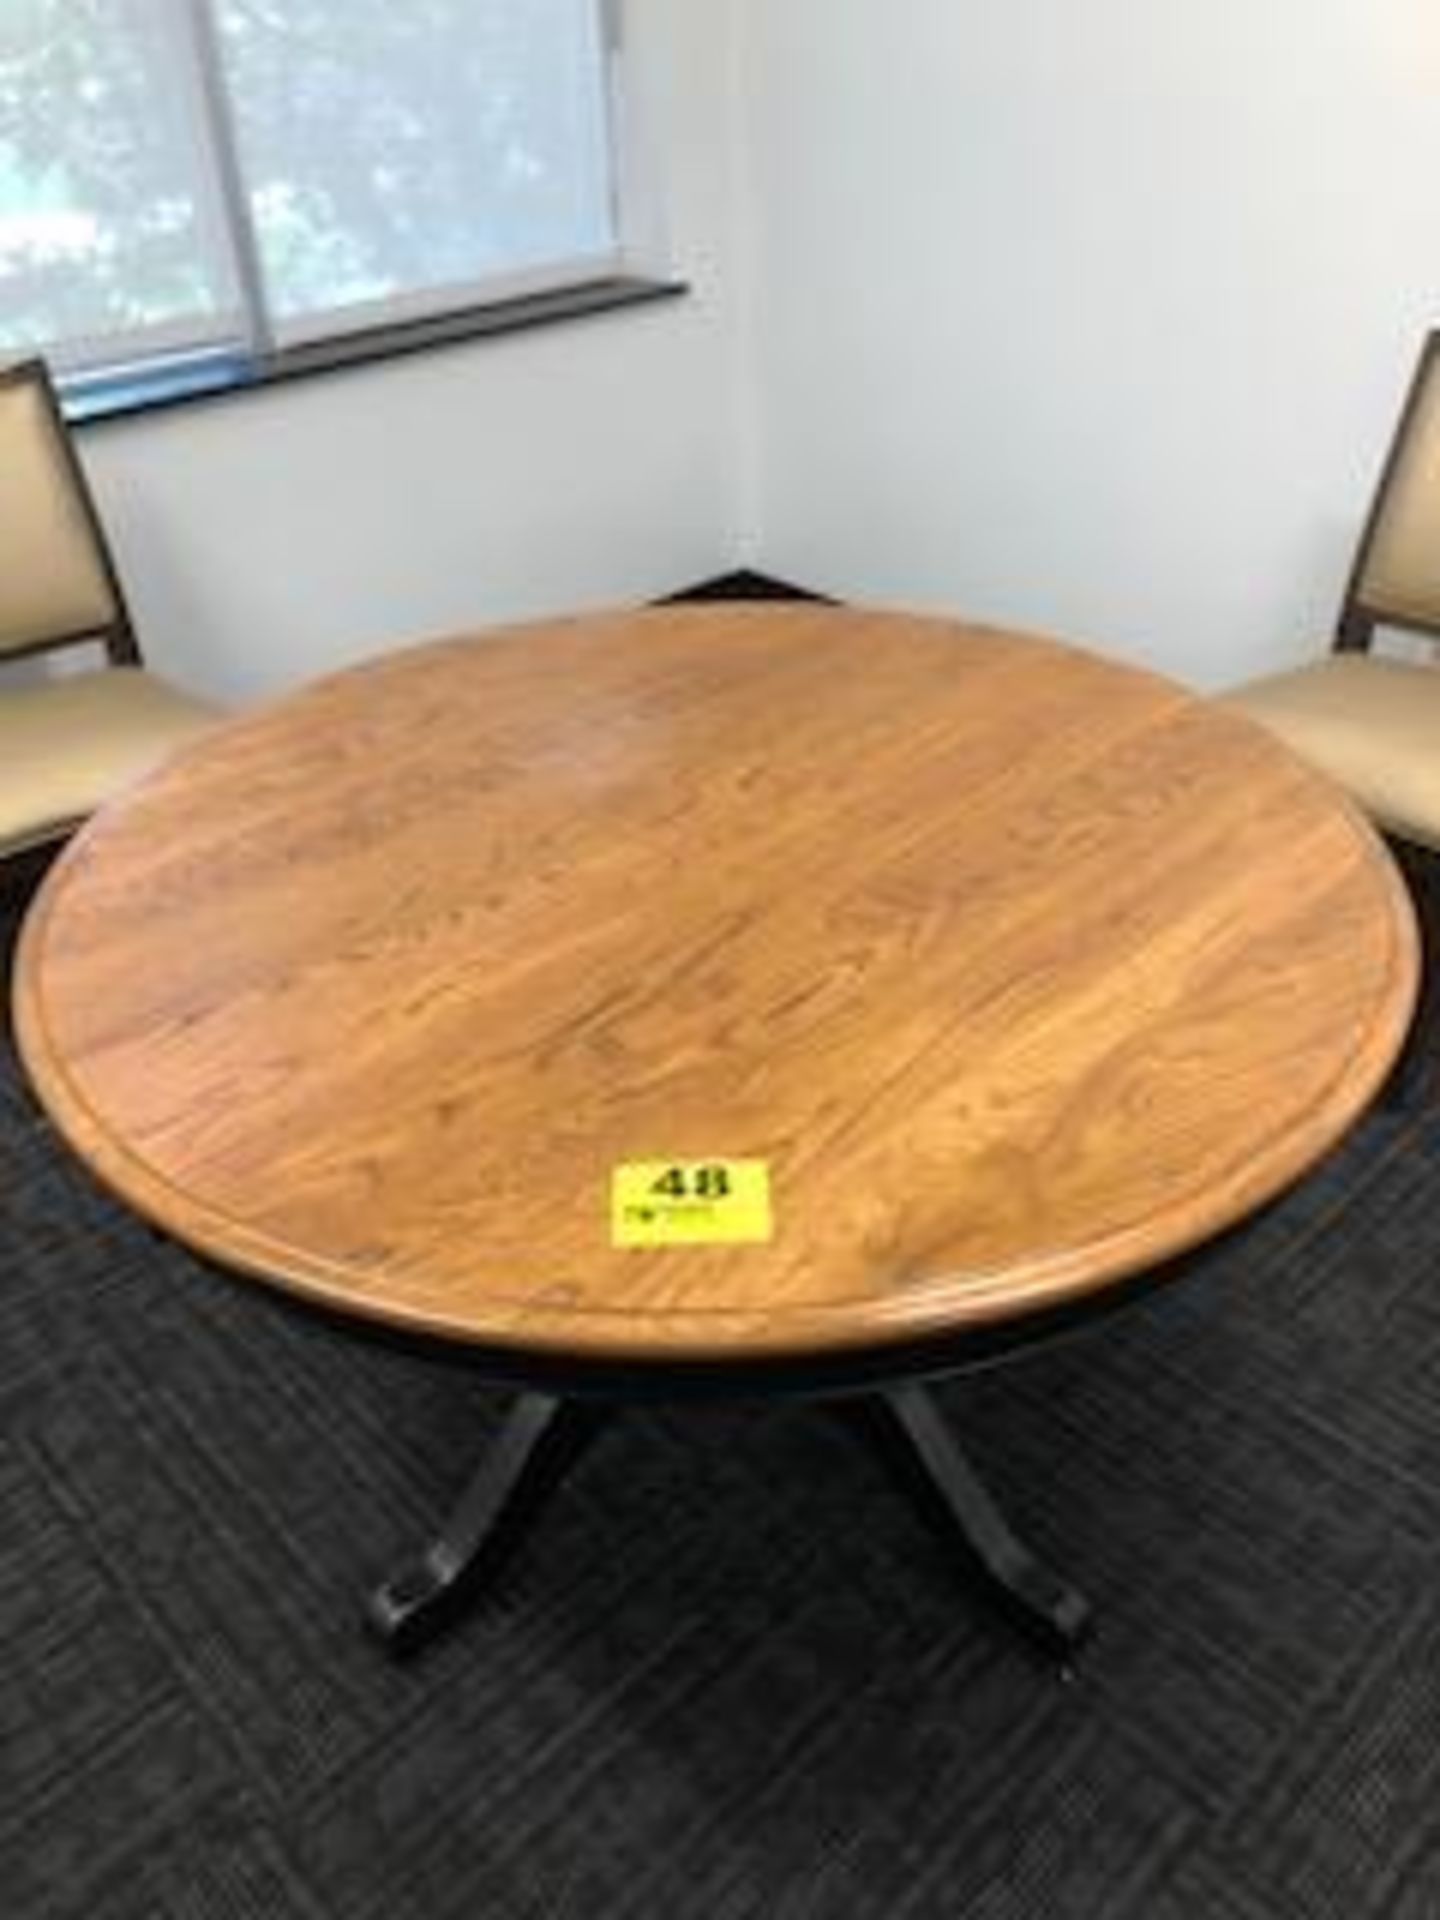 48" ROUND WOOD TABLE